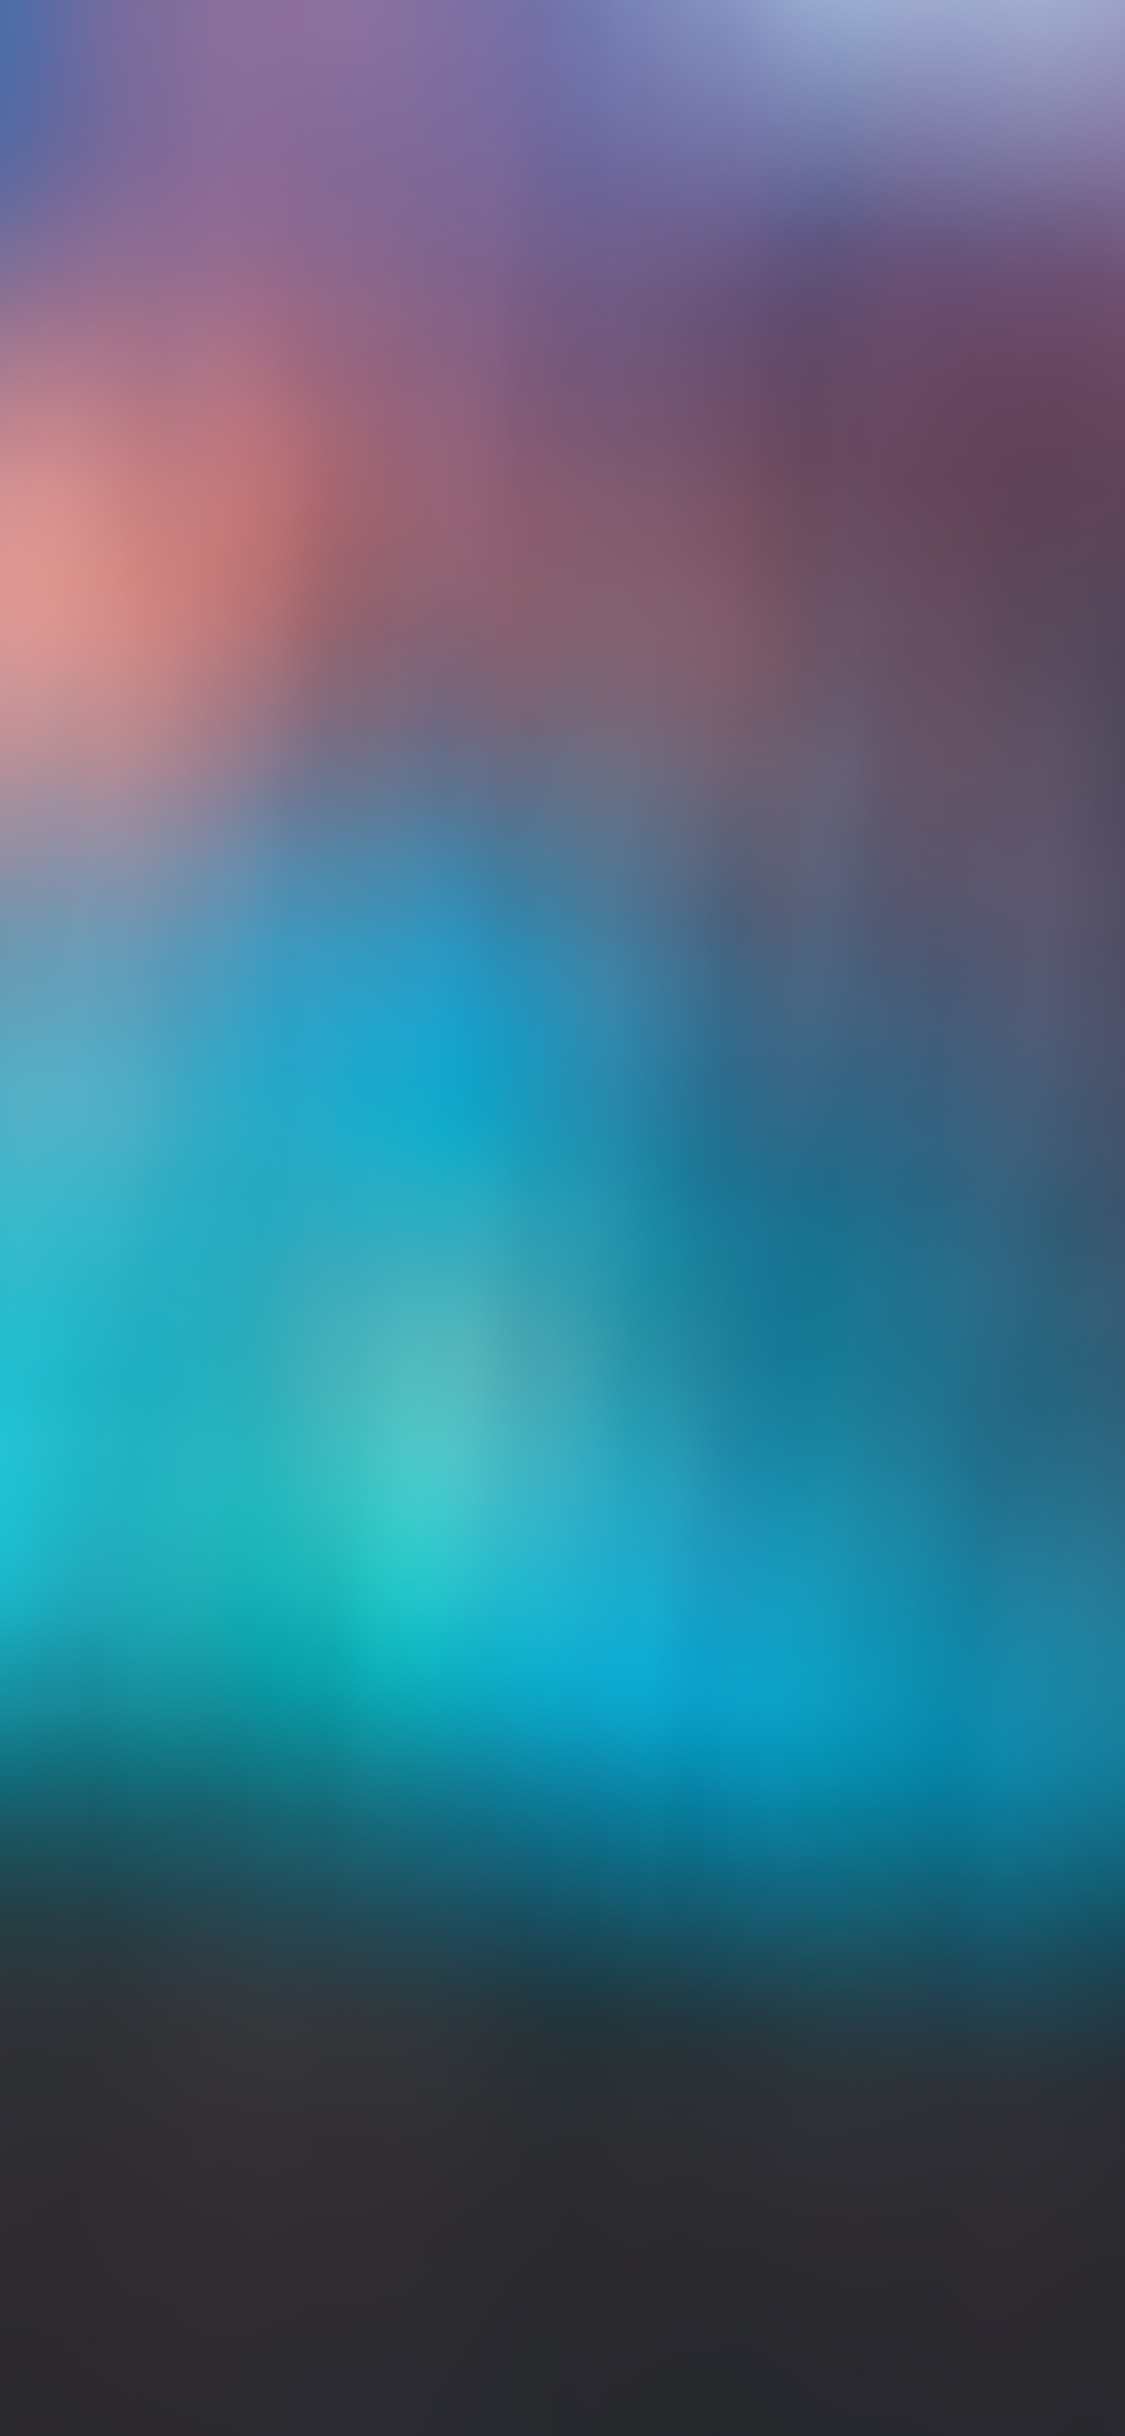 1125x2436 Blur Blue Gradient Cool Background Iphone XS,Iphone 10,Iphone X  HD 4k Wallpapers, Images, Backgrounds, Photos and Pictures